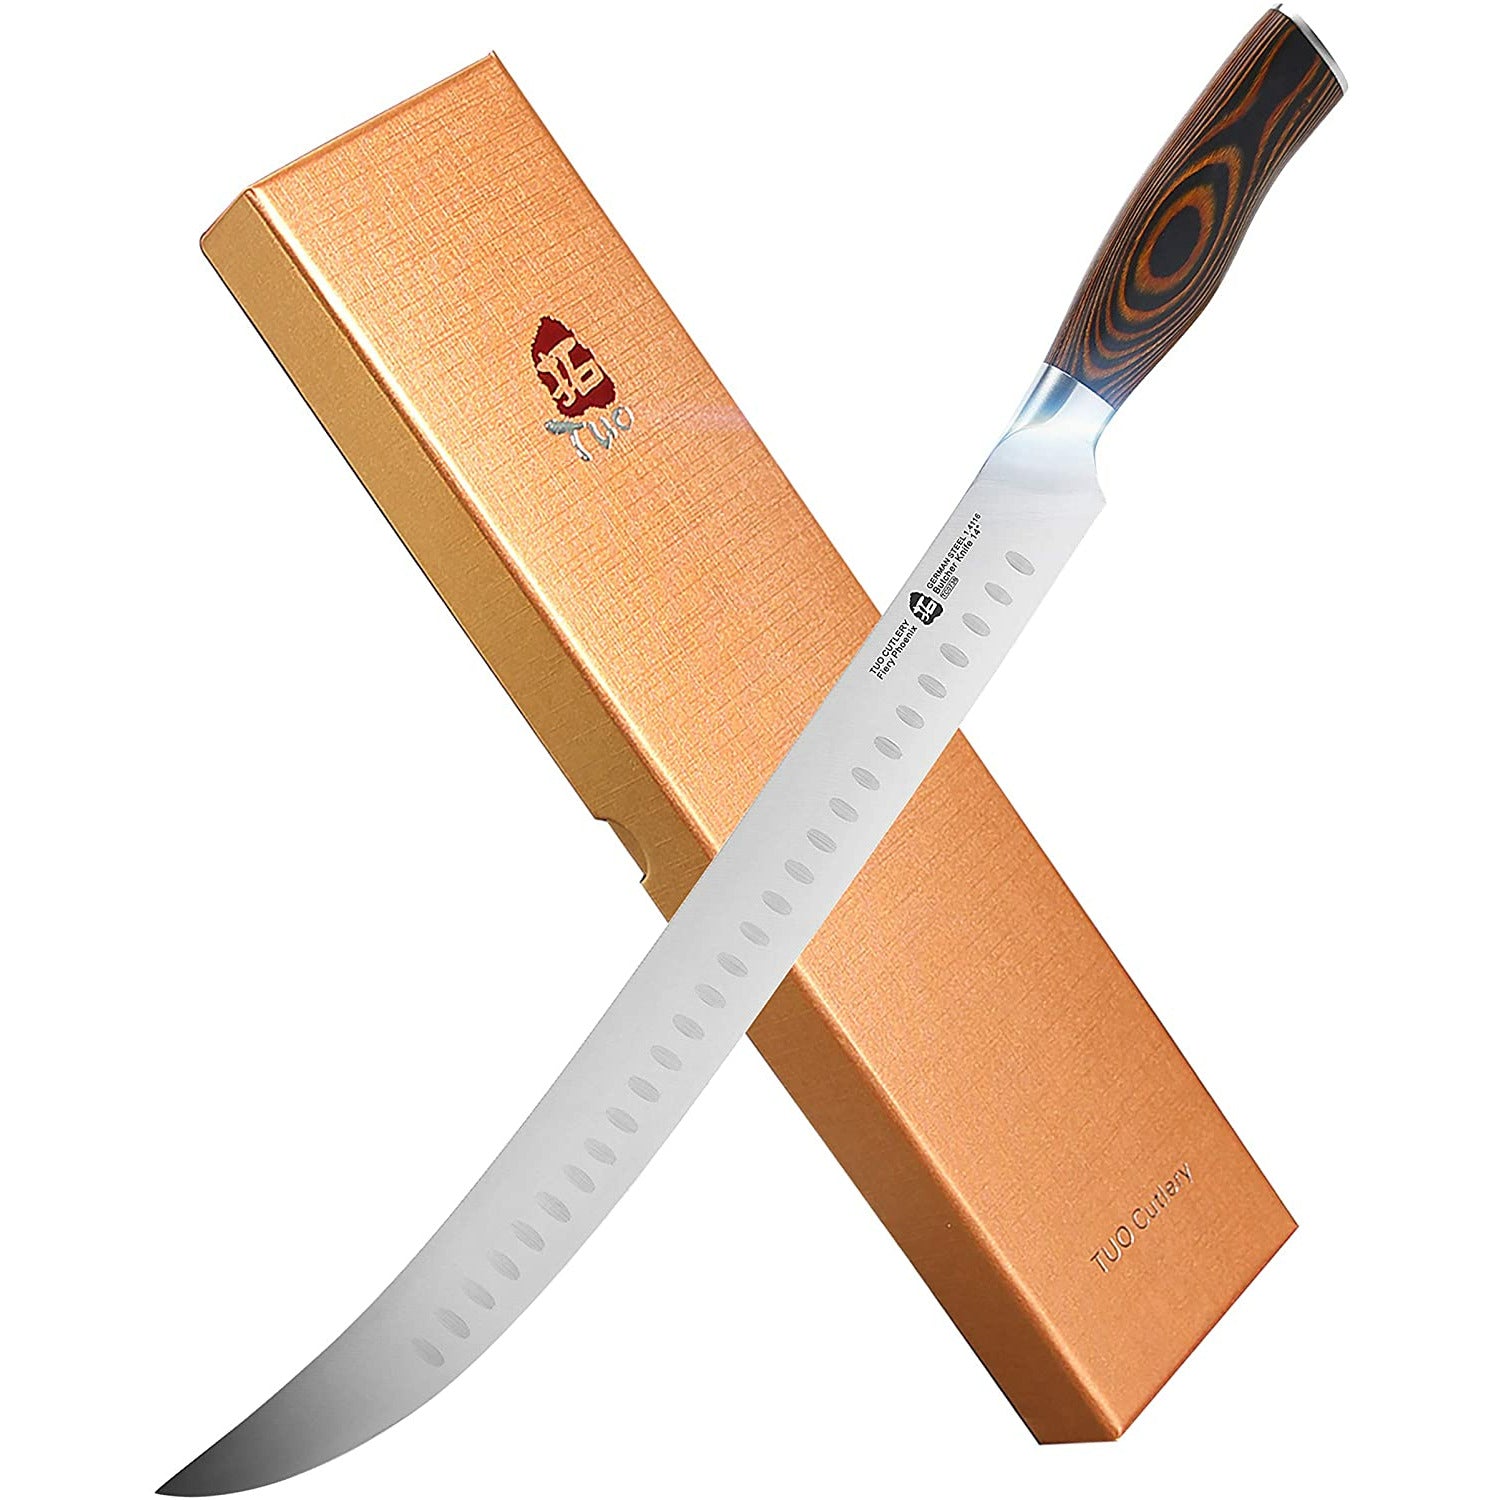 TUO Cutlery NEWEST Sharpest 7 Fillet / Boning Knife I Have Used